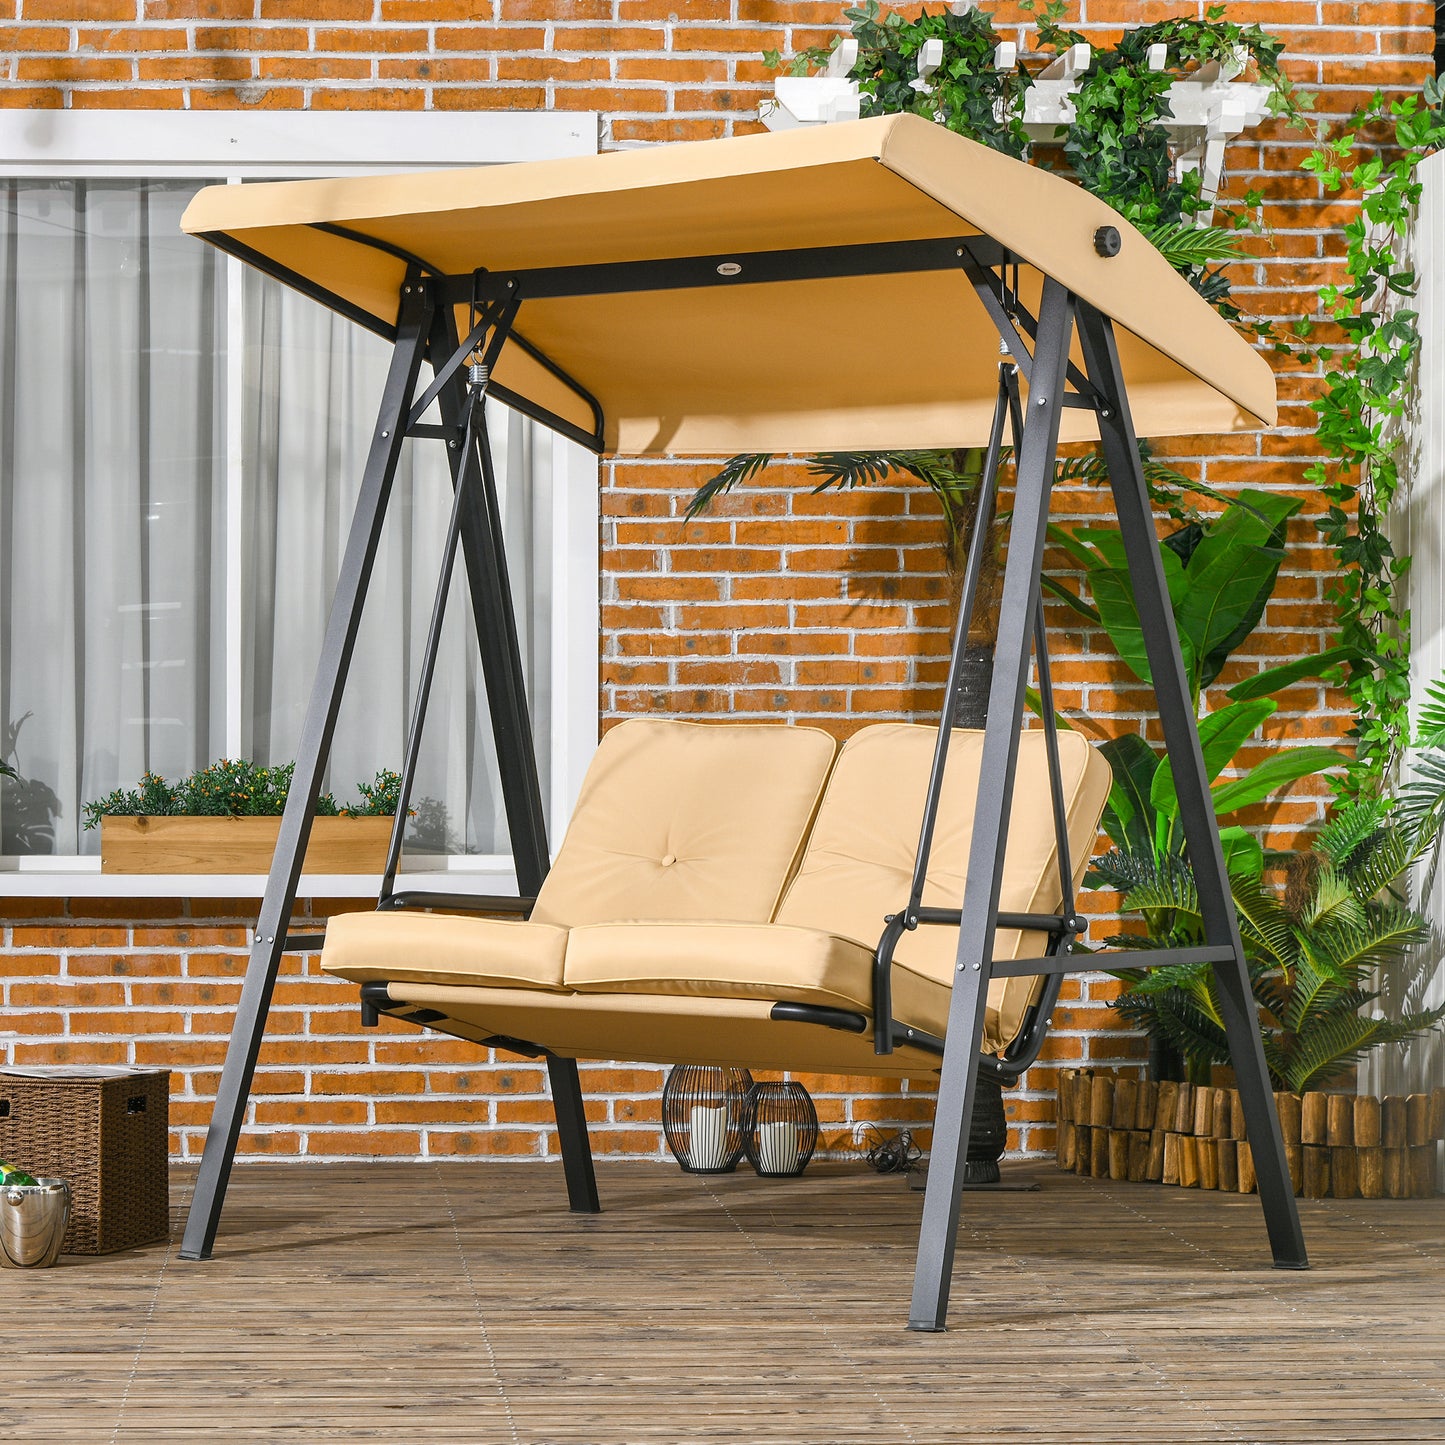 Outsunny Two-Seater Garden Swing Bench, with Adjustable Canopy - Beige